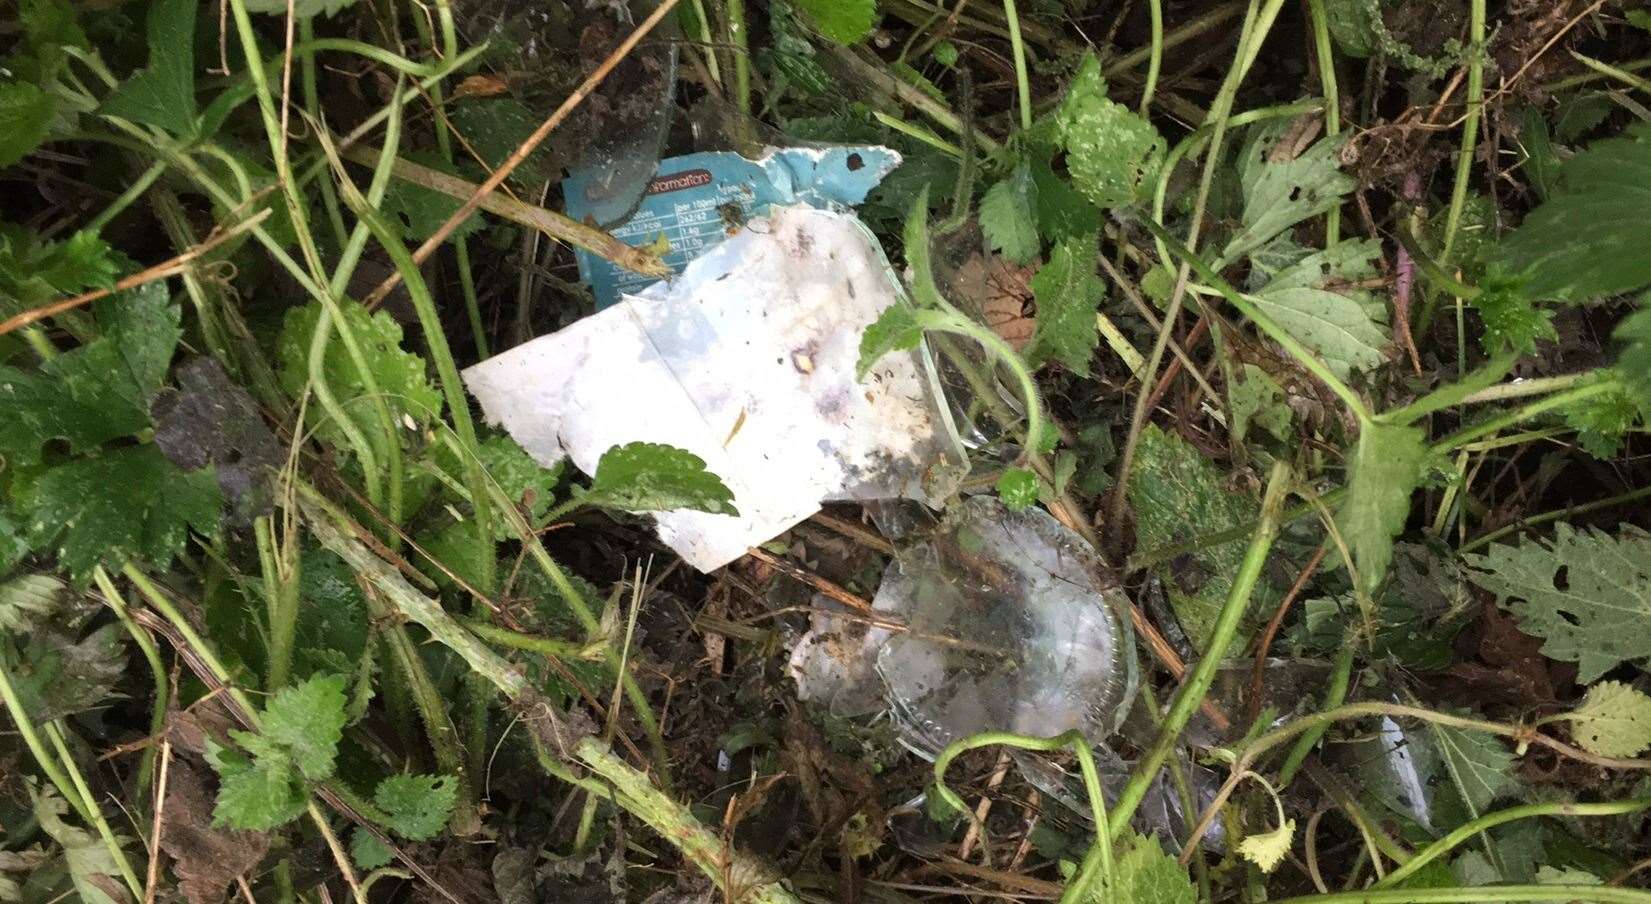 More litter tangled up in the grass along the canal. Picture: Eric Brown